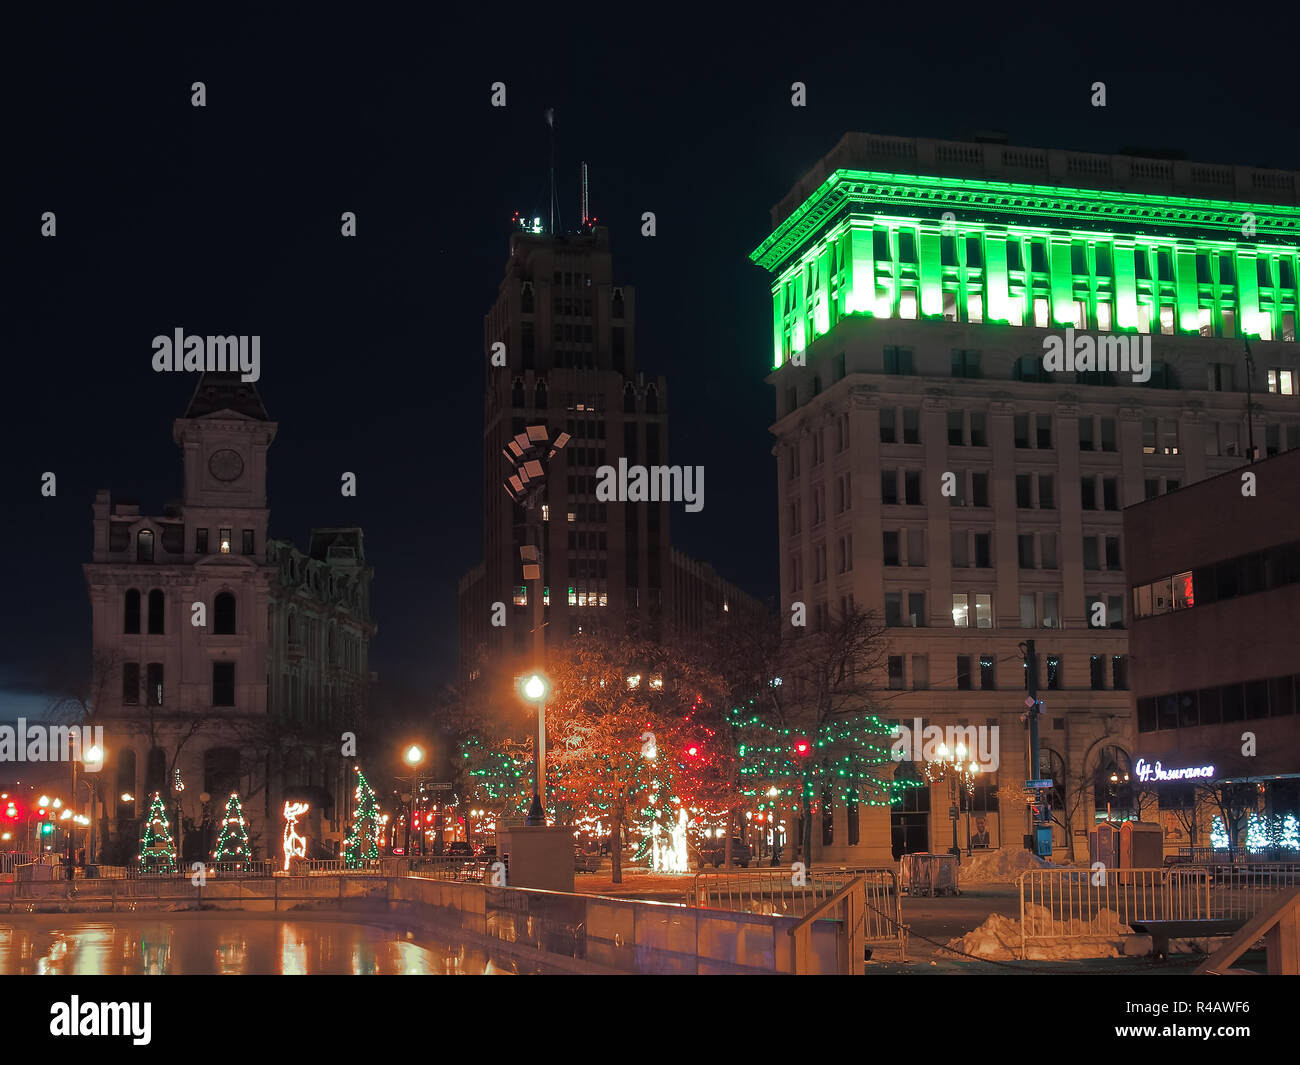 Syracuse, New york, USA. November 24, 2018. View of Clinton Square  at night in downtown Syracuse, New York at Christmastime Stock Photo